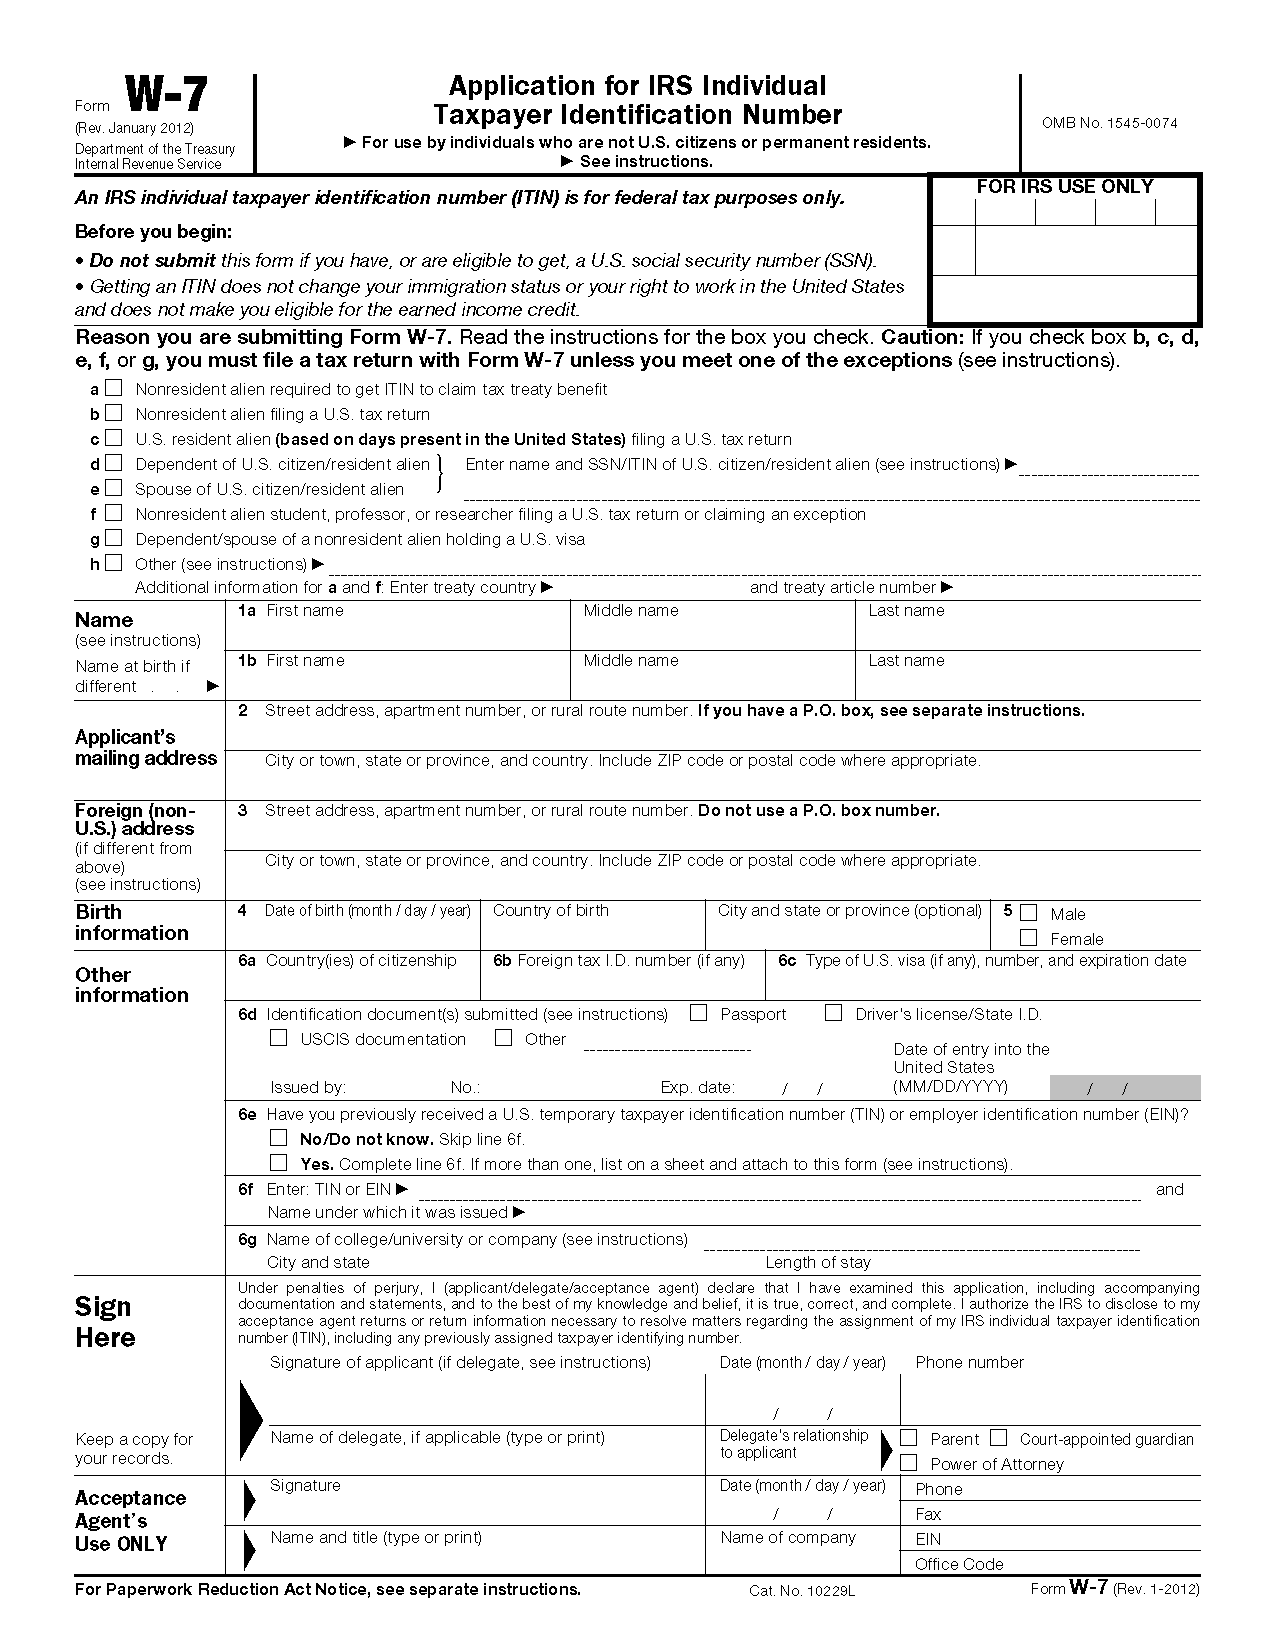 Form W 7 Application For IRS Individual Taxpayer 